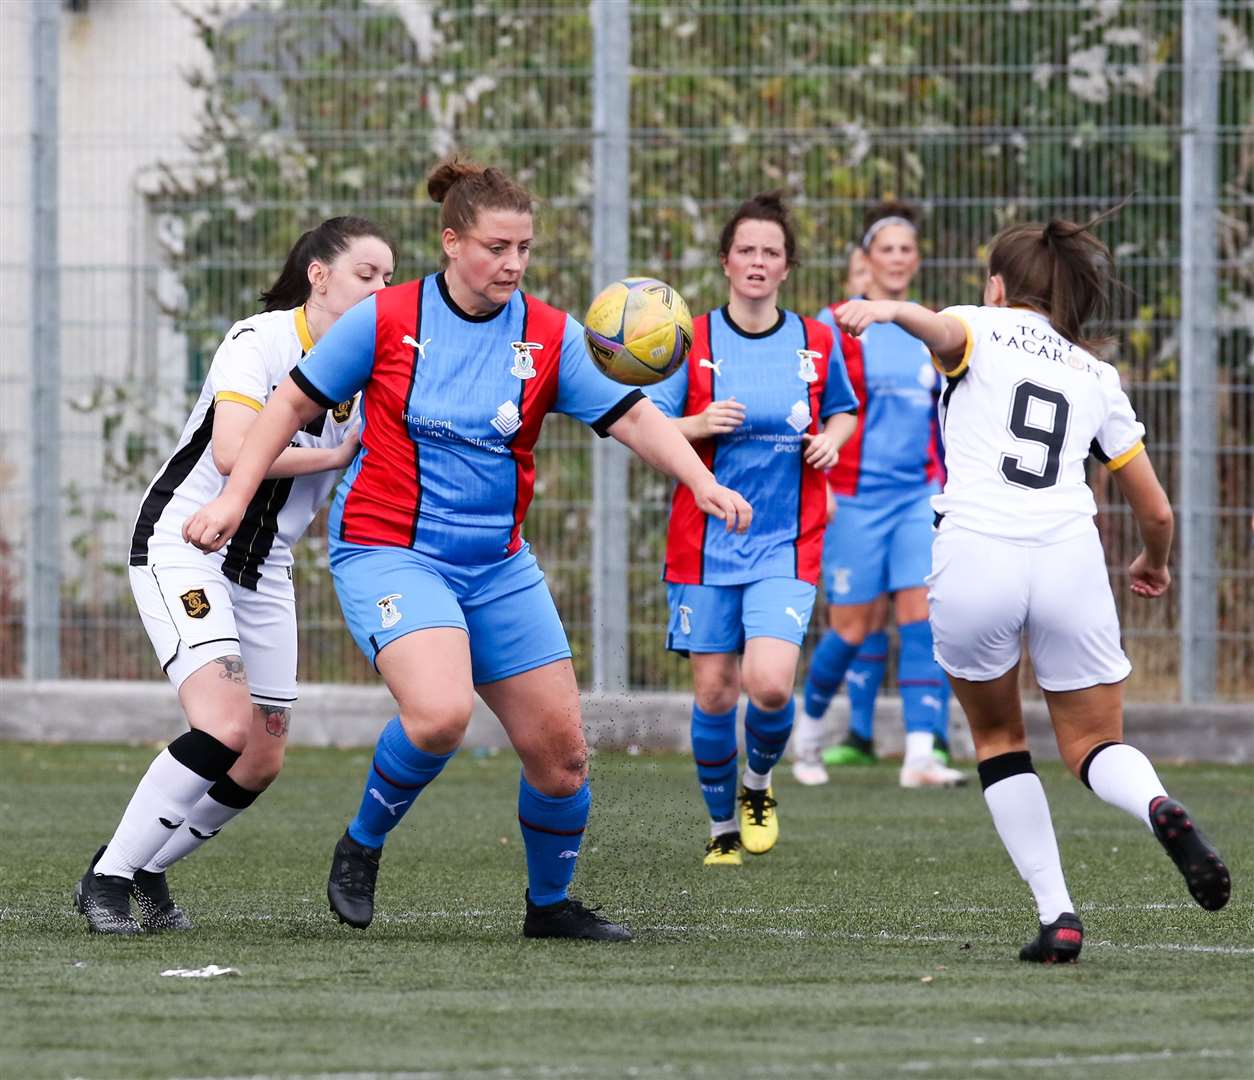 ###FREE FIRST USE###FREE FIRST USE###FREE FIRST USE### Pictured: Livingston WFC's No8 Rebecca Jaconelli putting pressure on Inverness Caledonian Thistle WFC's No21 Finella Annand as Livingston WFC's No9 Jennifer Margaret Dodds closes in Donald Cameron | SportPix for SWF